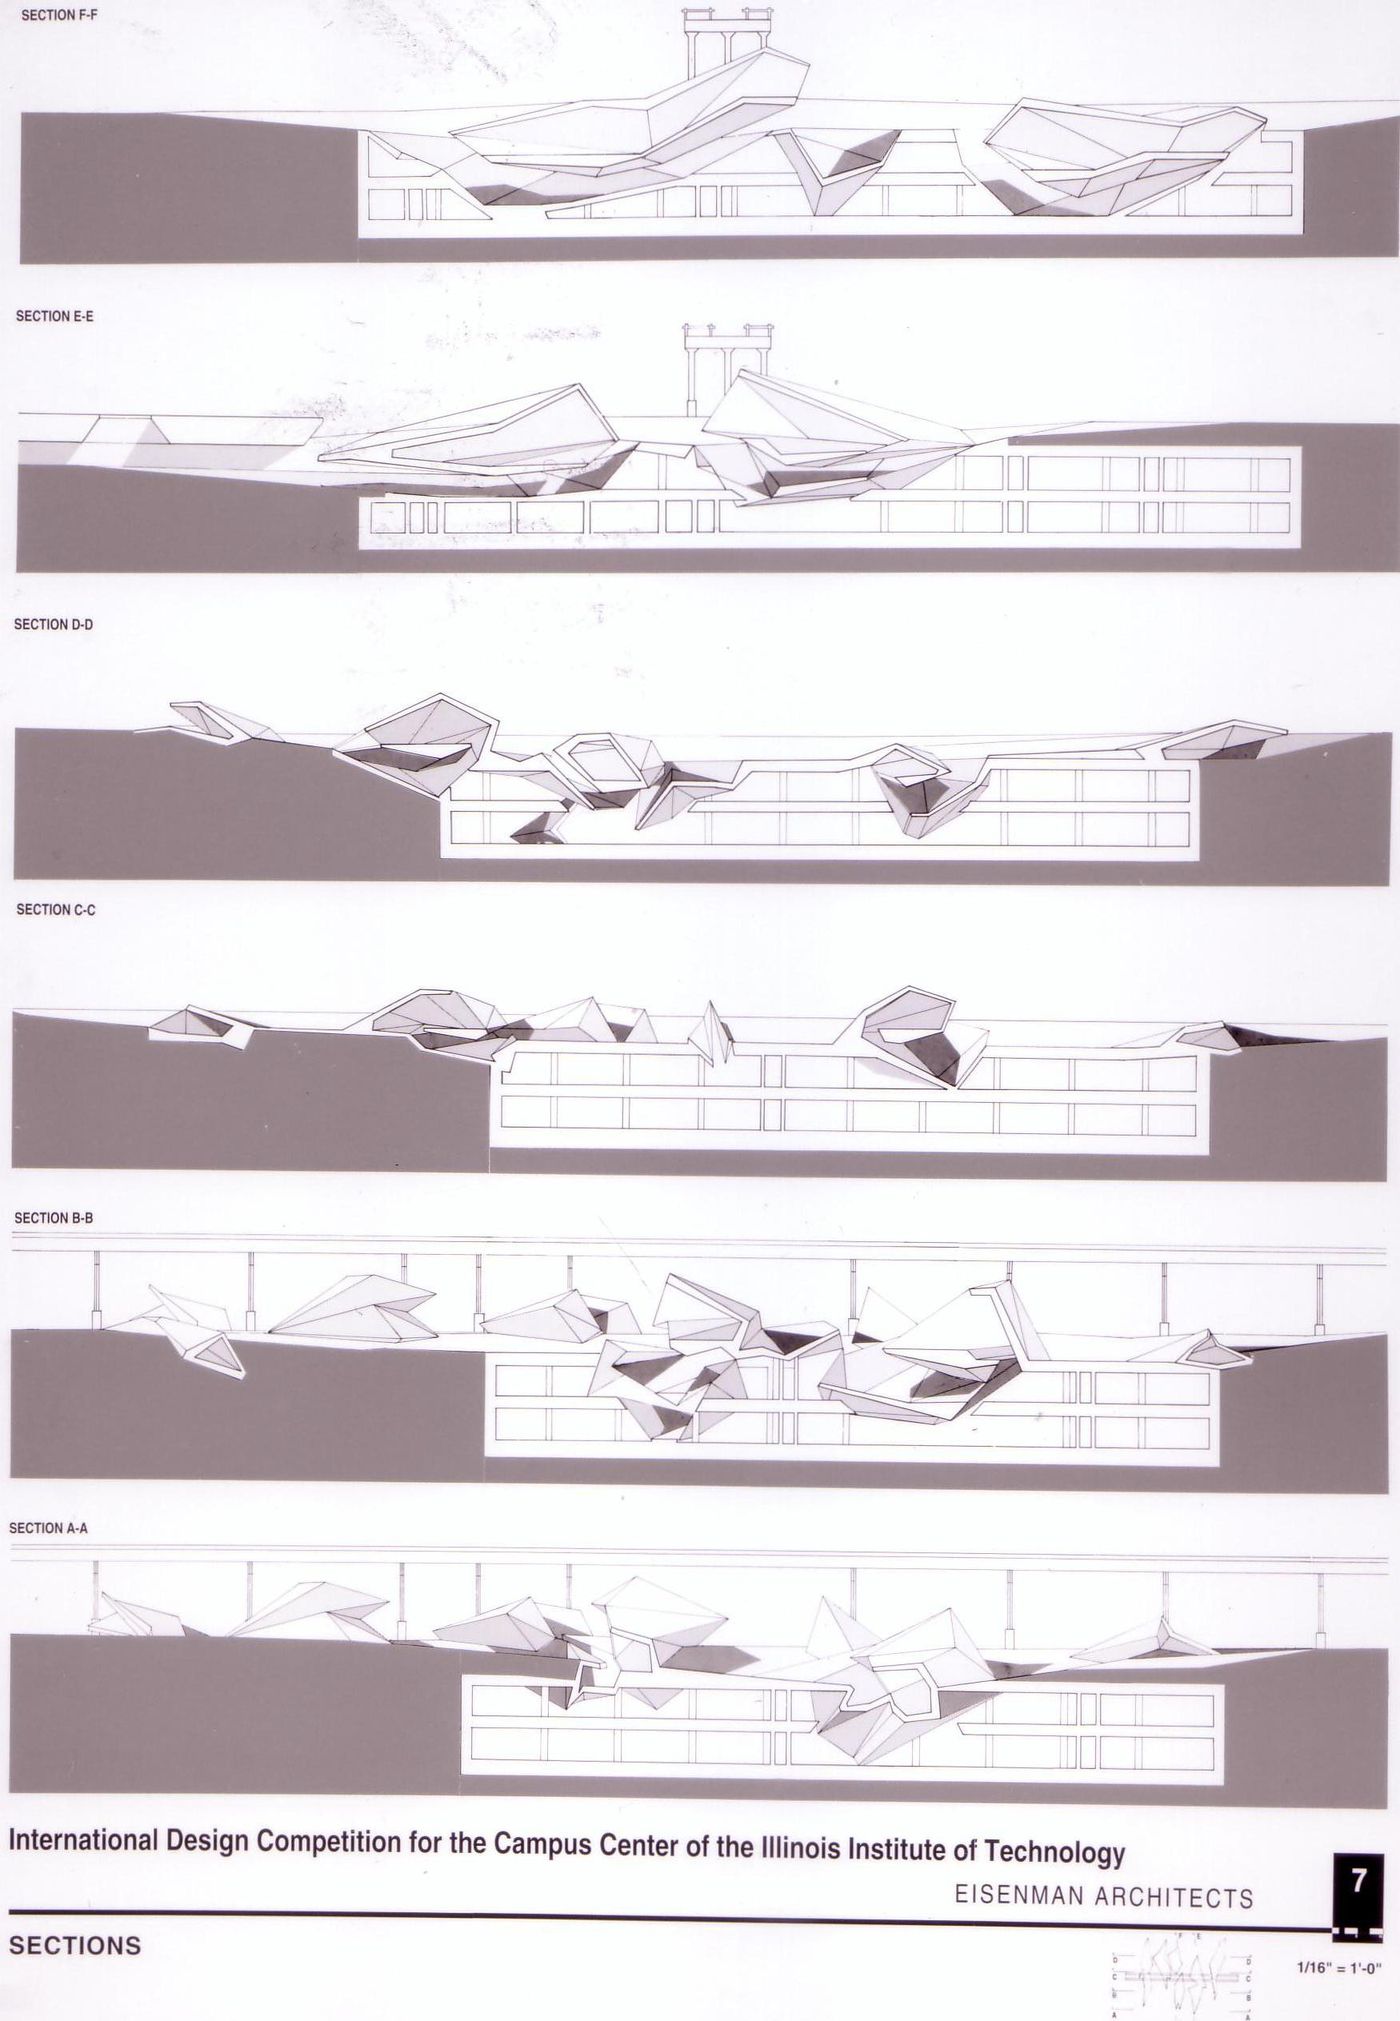 Sections, submission to the Richard H. Driehaus Foundation International Design Competition for a new campus center (1997-98), Illinois Institute of Technology, Chicago, Illinois